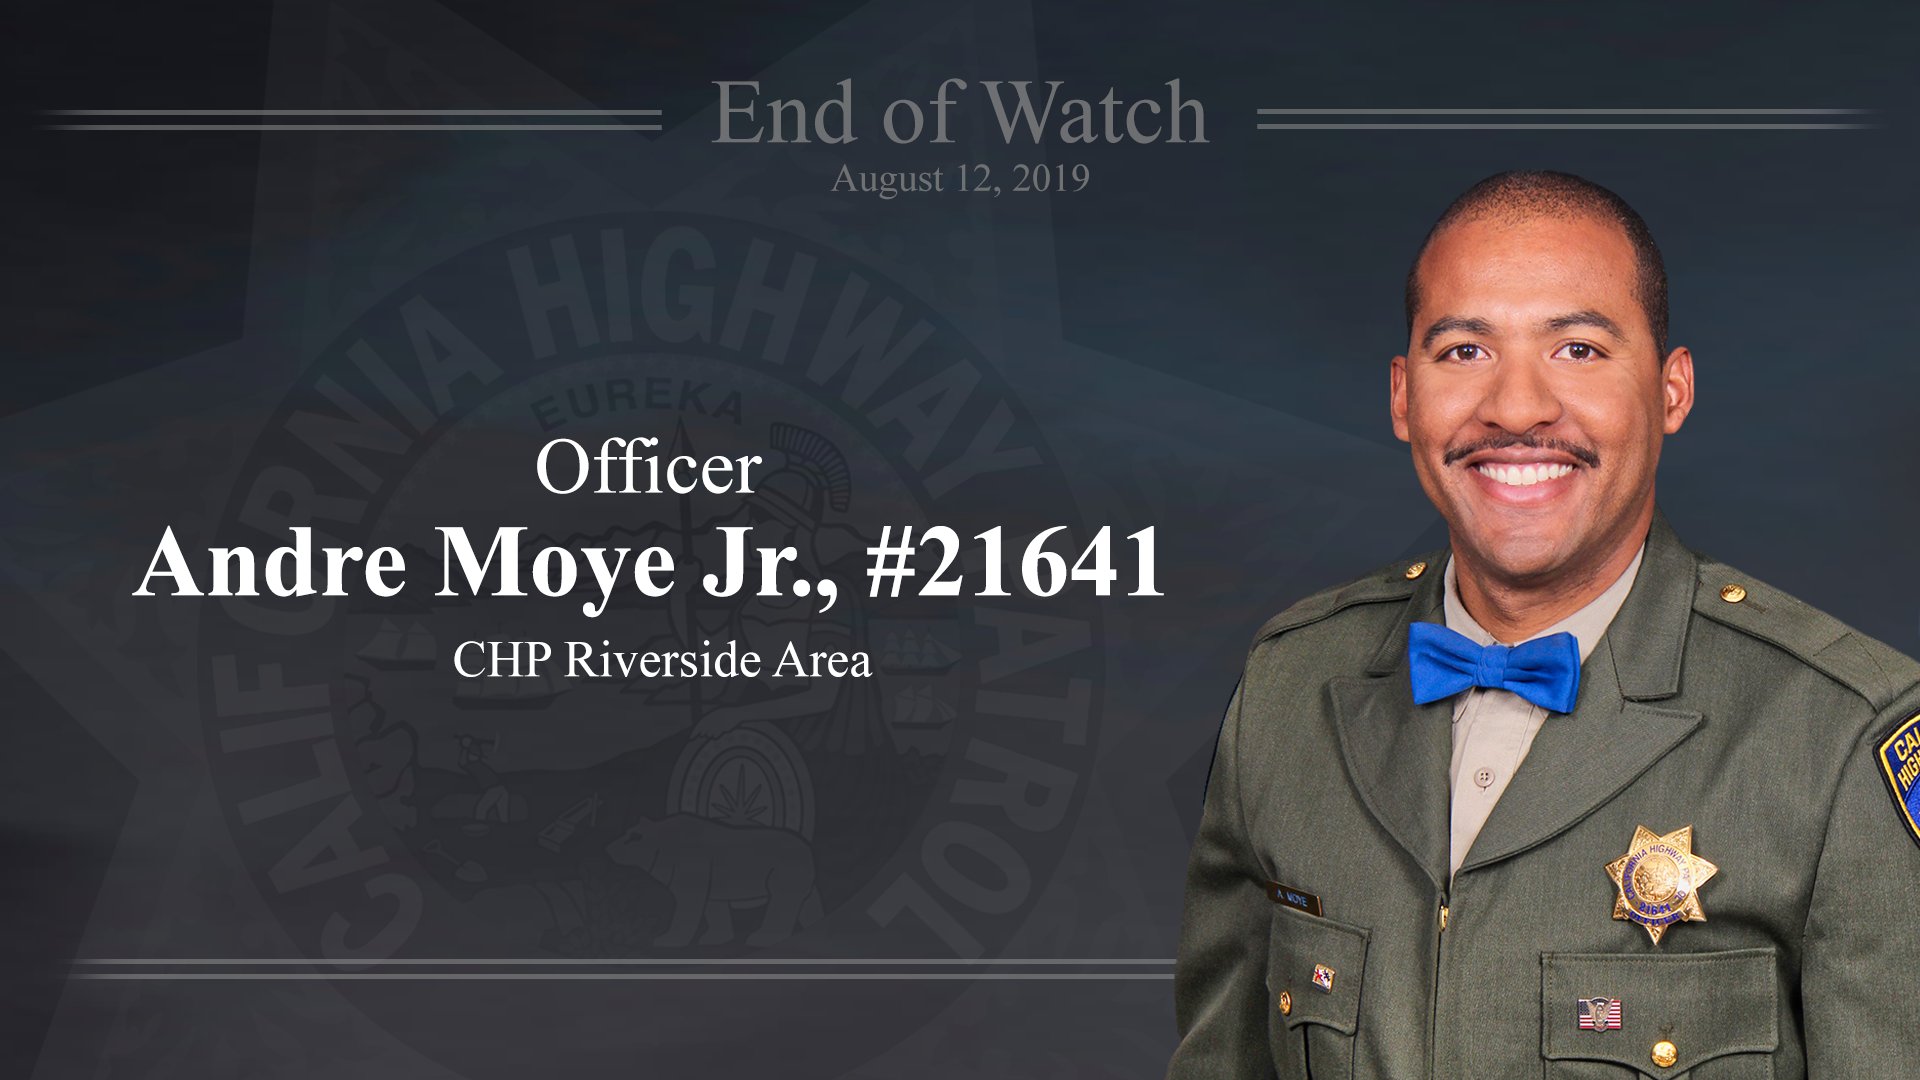 Fallen Hero CHP Officer Andre Moye, Jr. #21641 was tragically killed in the line of duty on August 12, 2019 in the Riverside area.